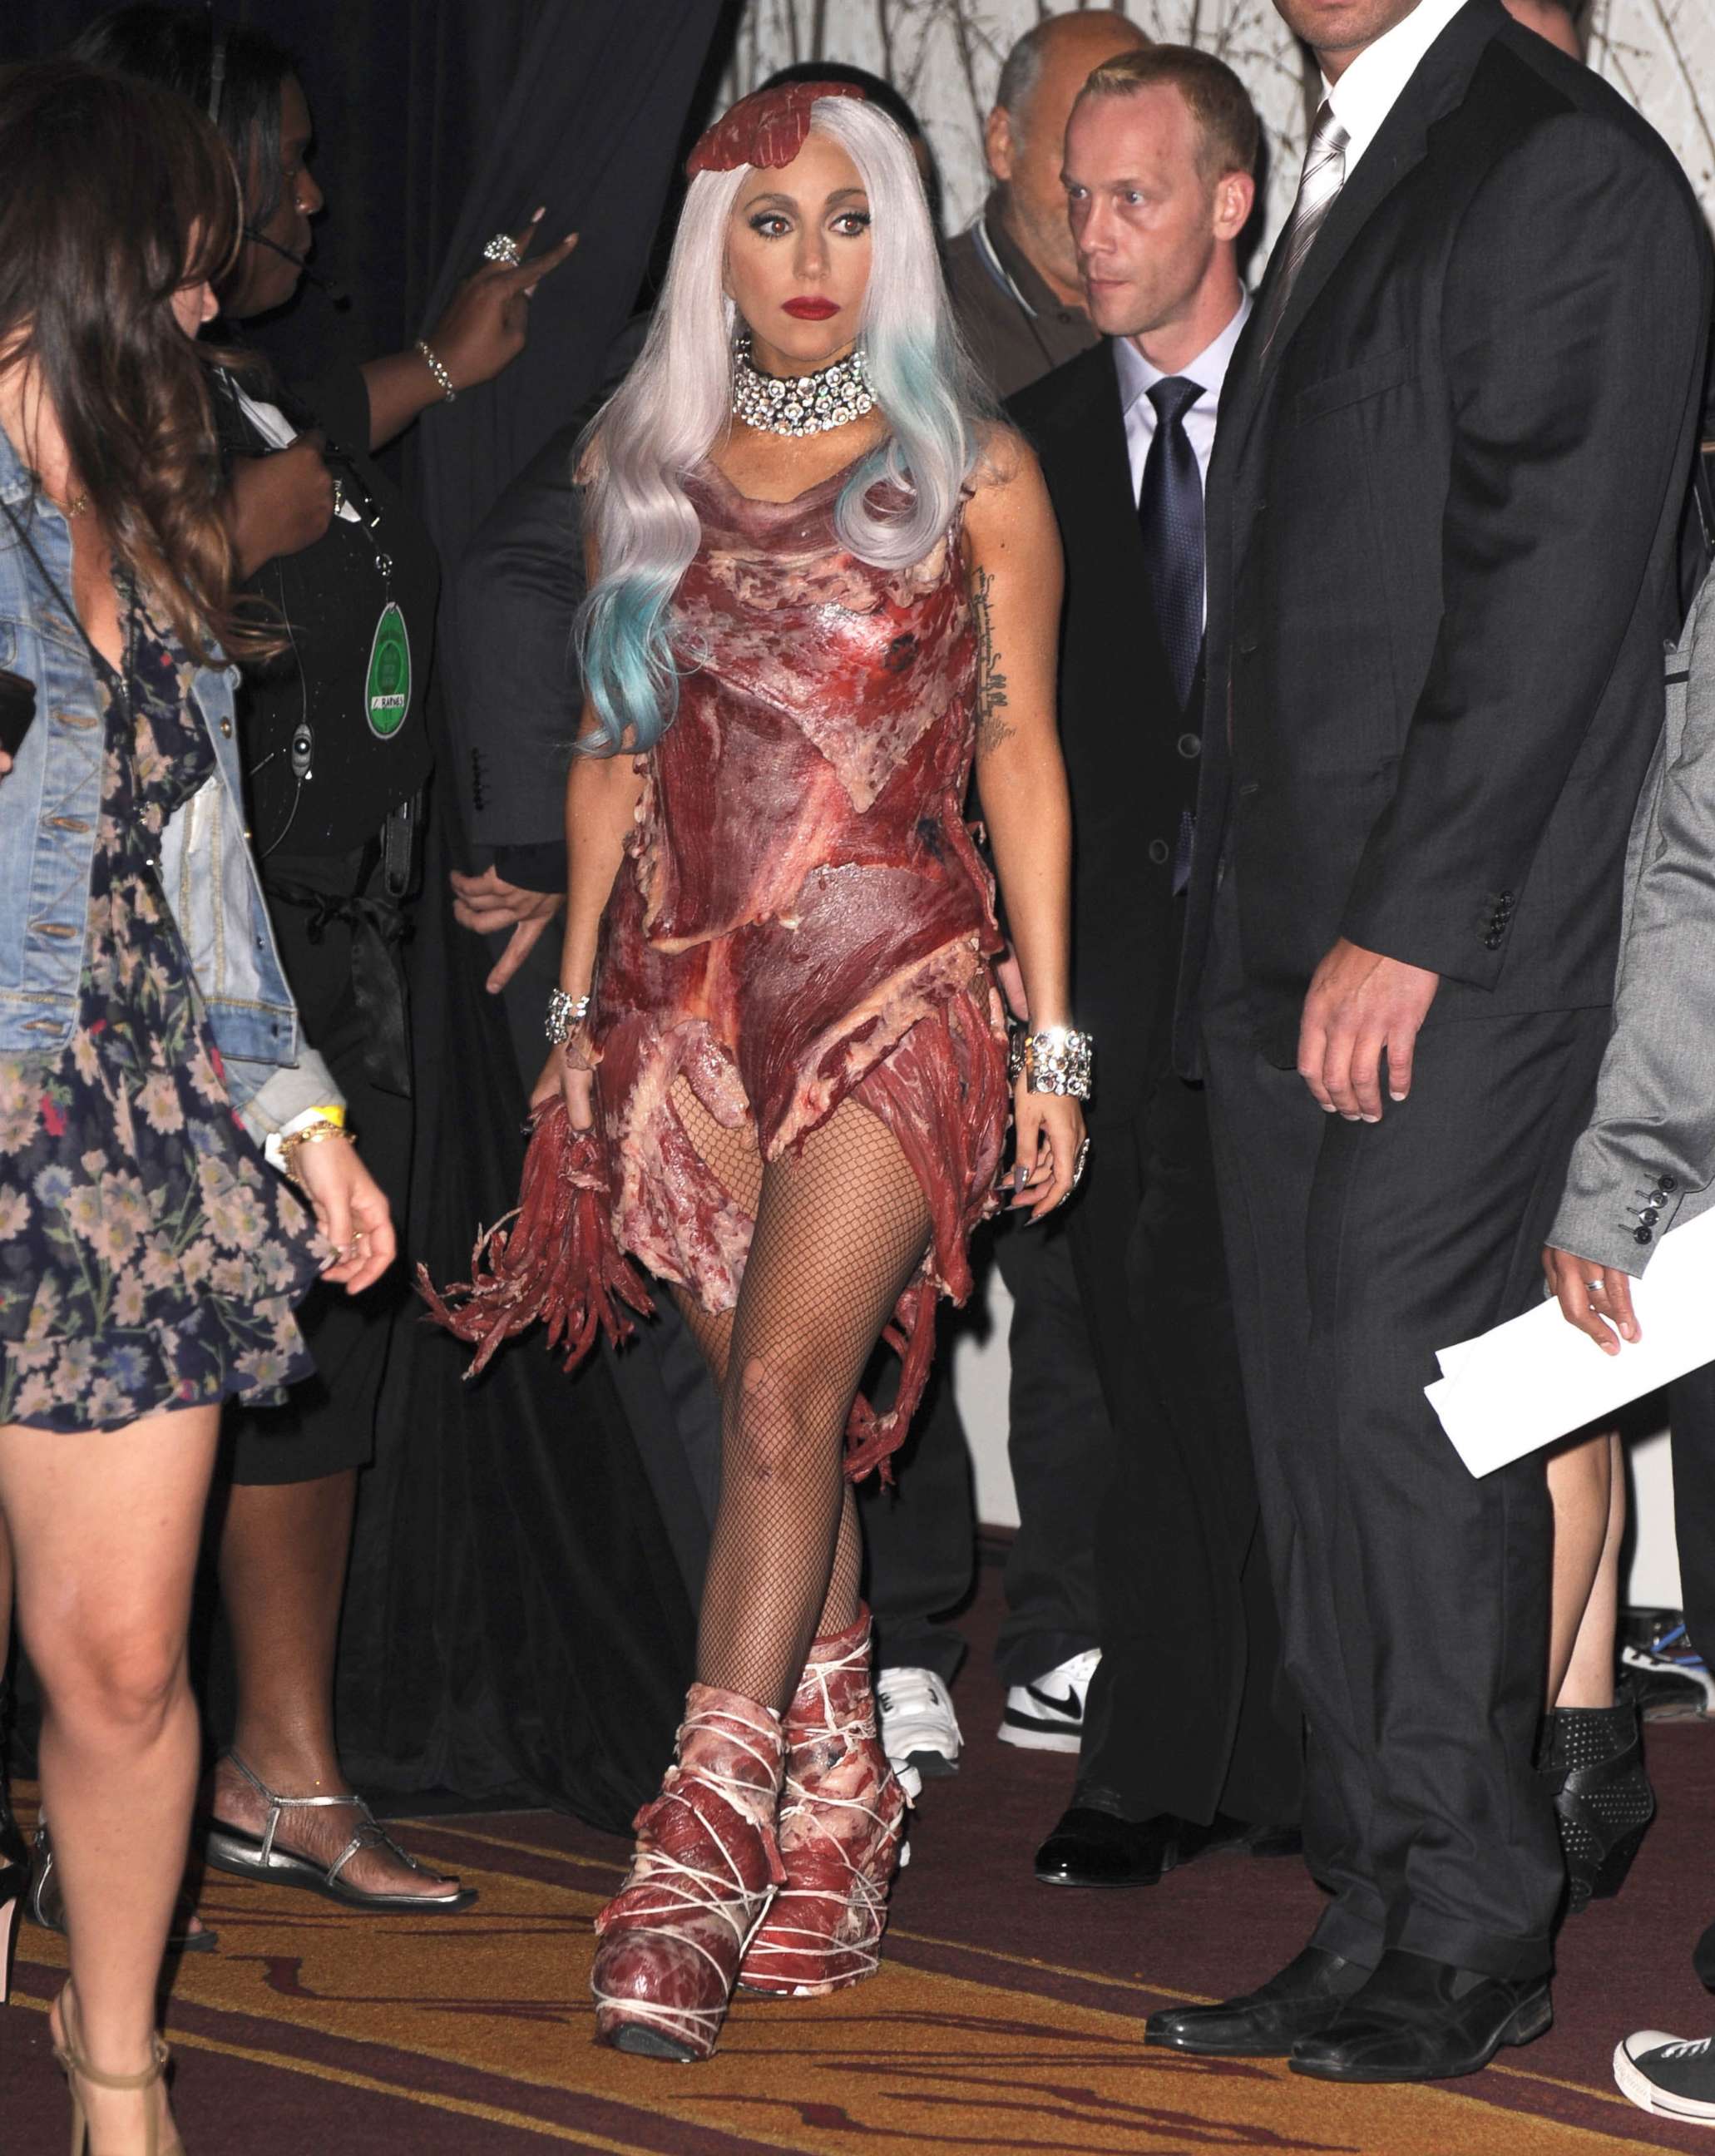 PHOTO: Lady Gaga wears a meat dress at the 2010 MTV Video Music Awards on Sept. 12, 2010, in Los Angeles.